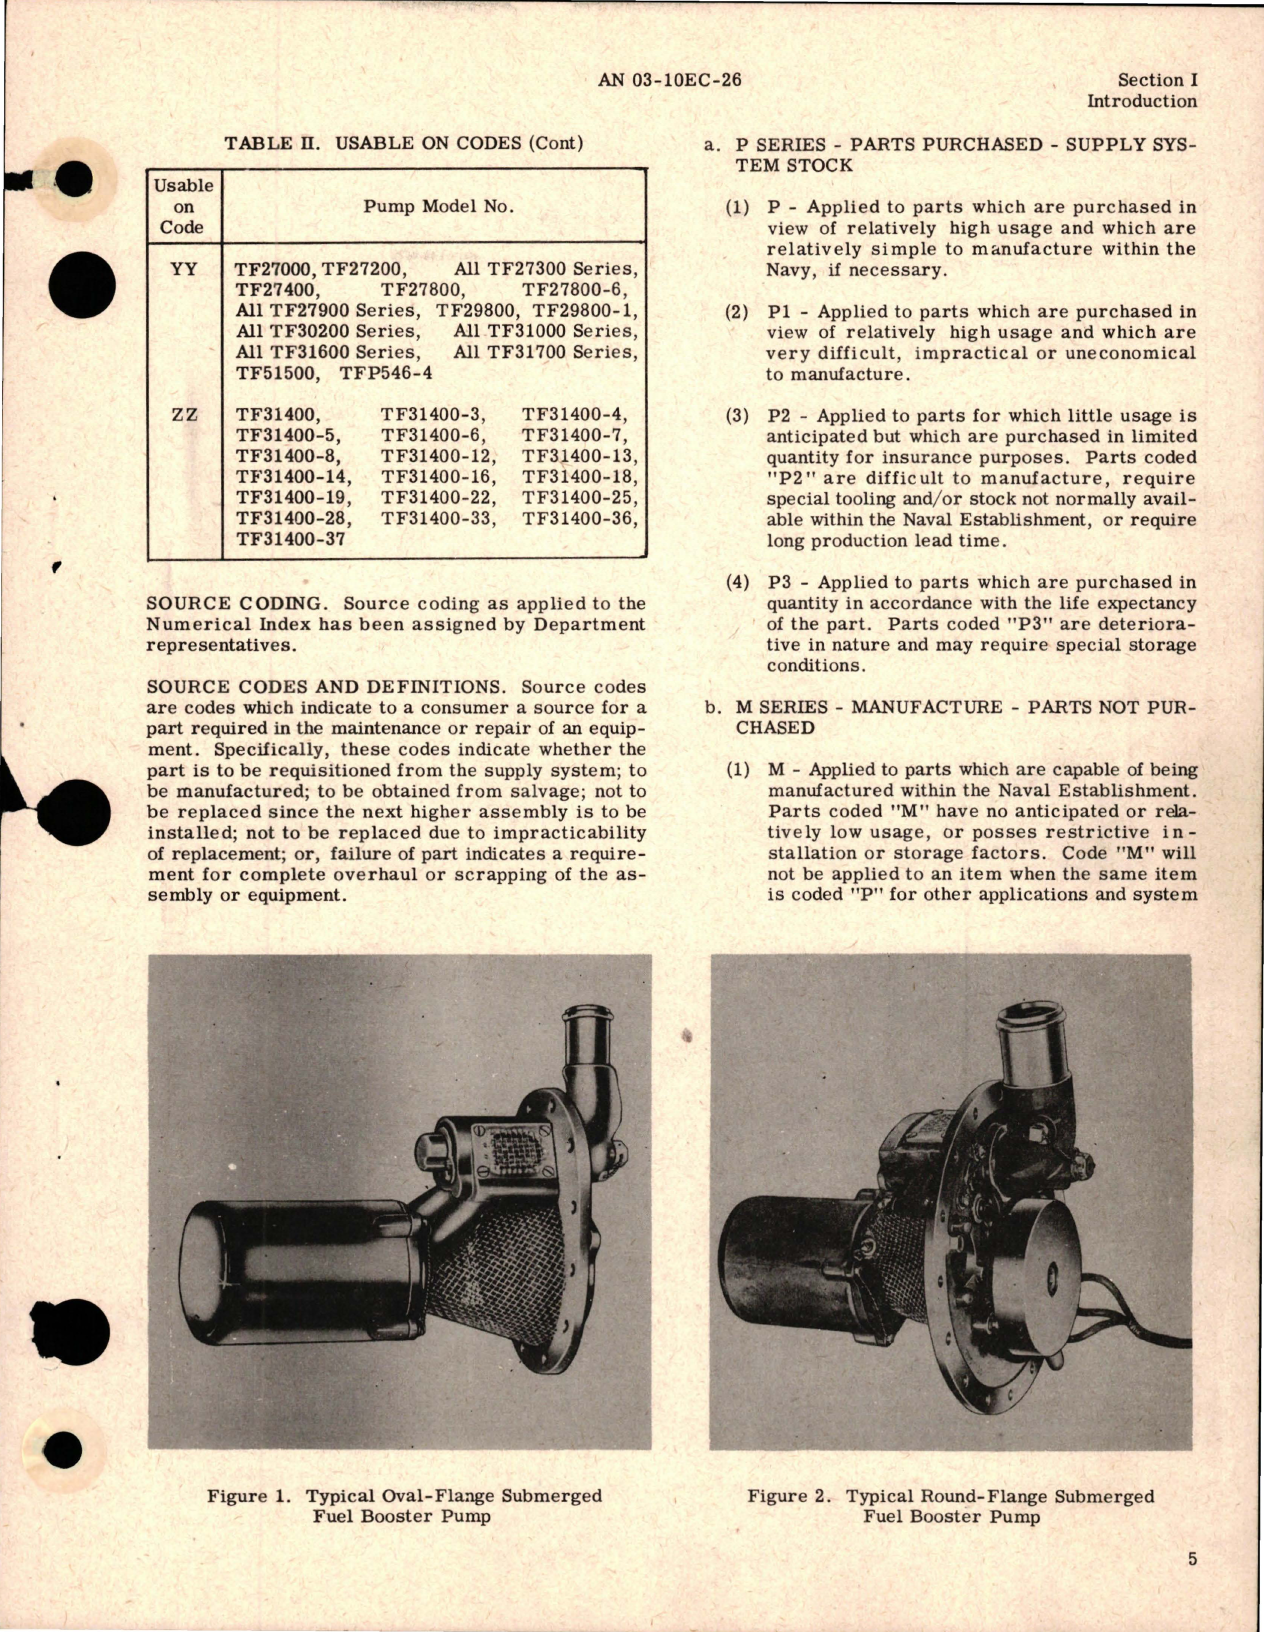 Sample page 7 from AirCorps Library document: Illustrated Parts Breakdown for Submerged Fuel Booster Pump - Models TF2 and TF3 Series